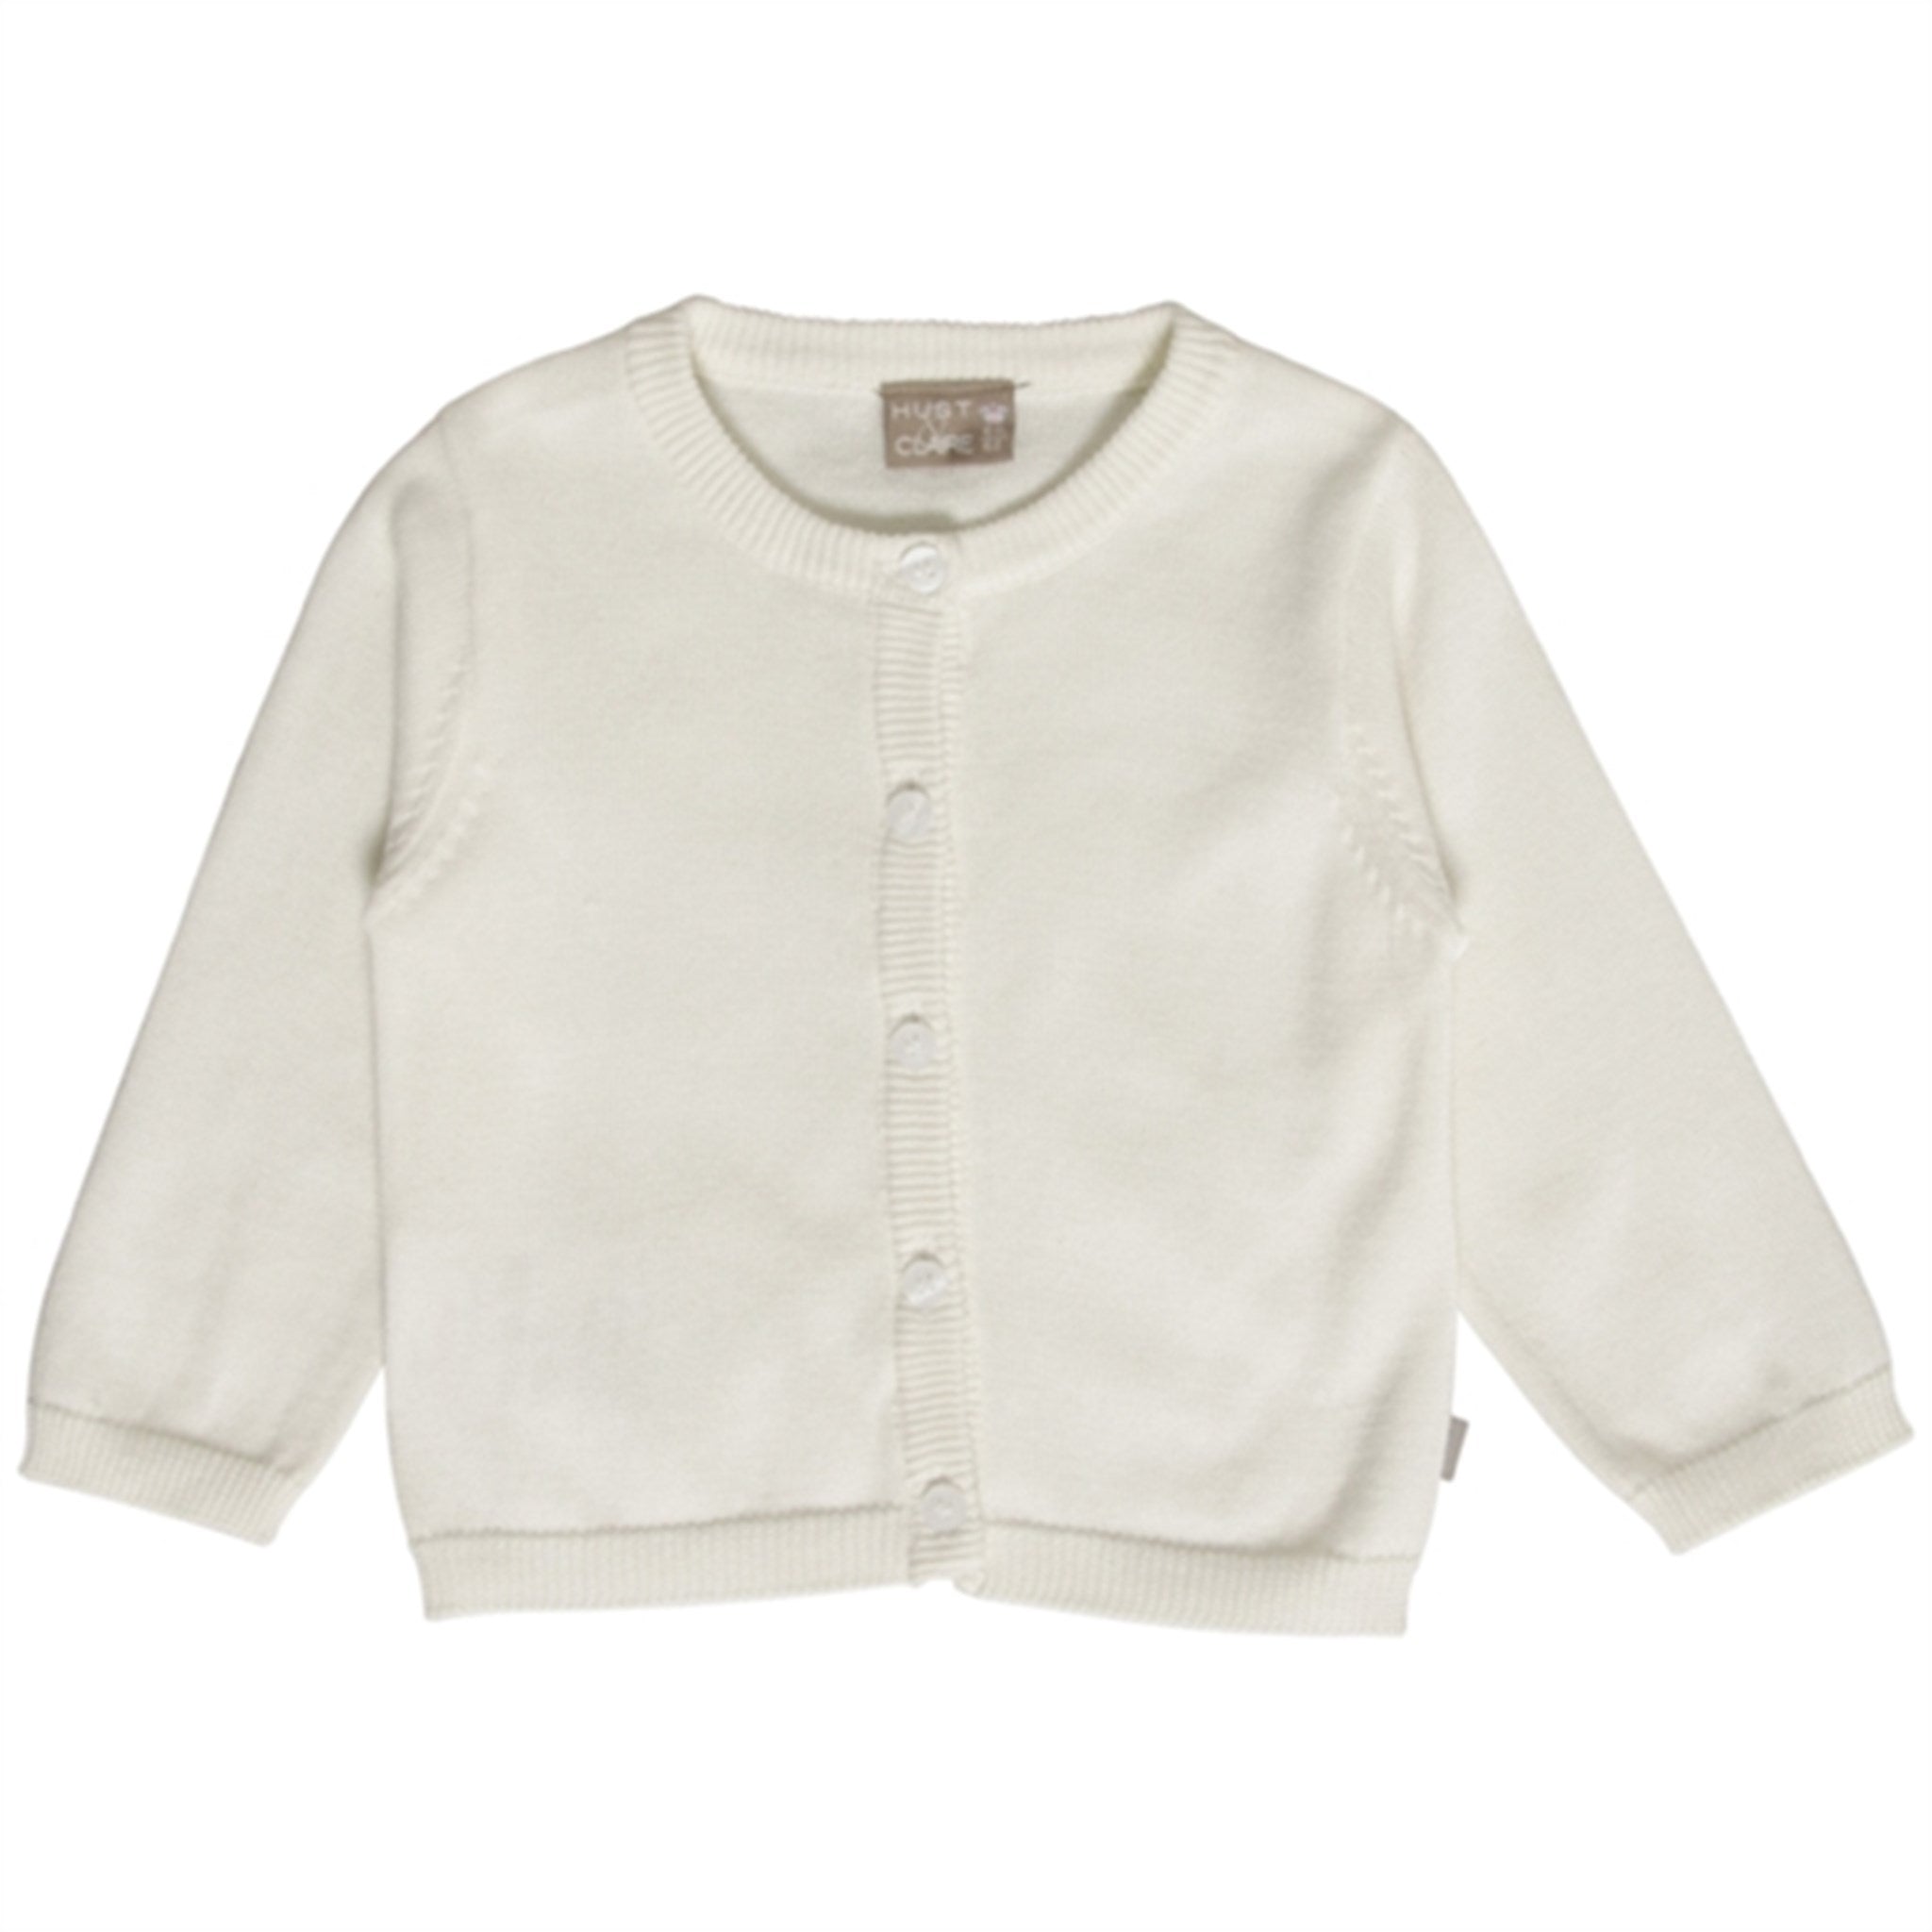 Hust & Claire Baby Ivory Claire Cardigan NOOS